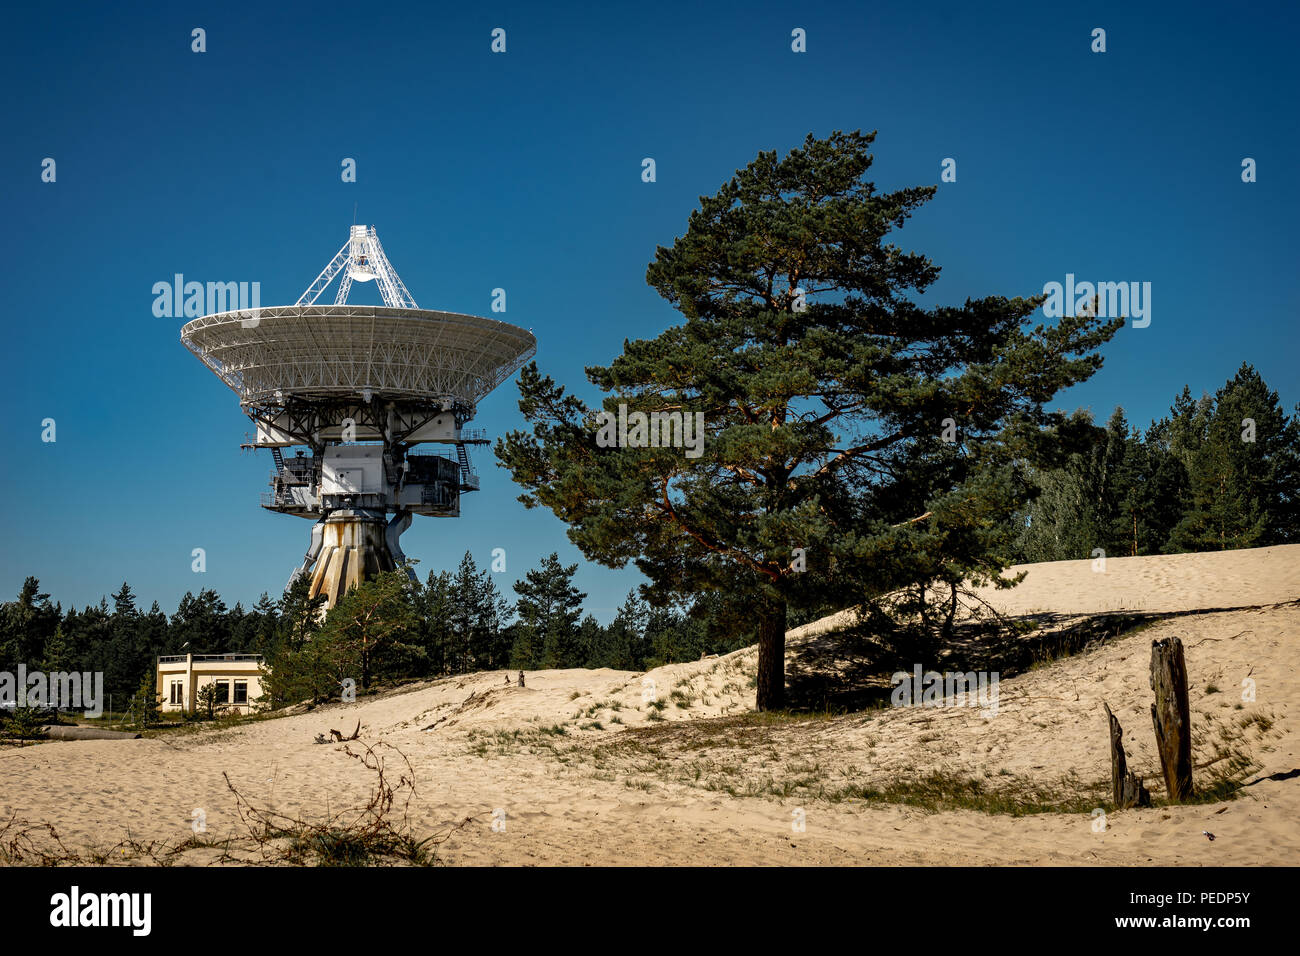 Telecommunication Radio Antenna And Satelite Tower With Blue Sky Stock  Photo, Picture and Royalty Free Image. Image 28591650.